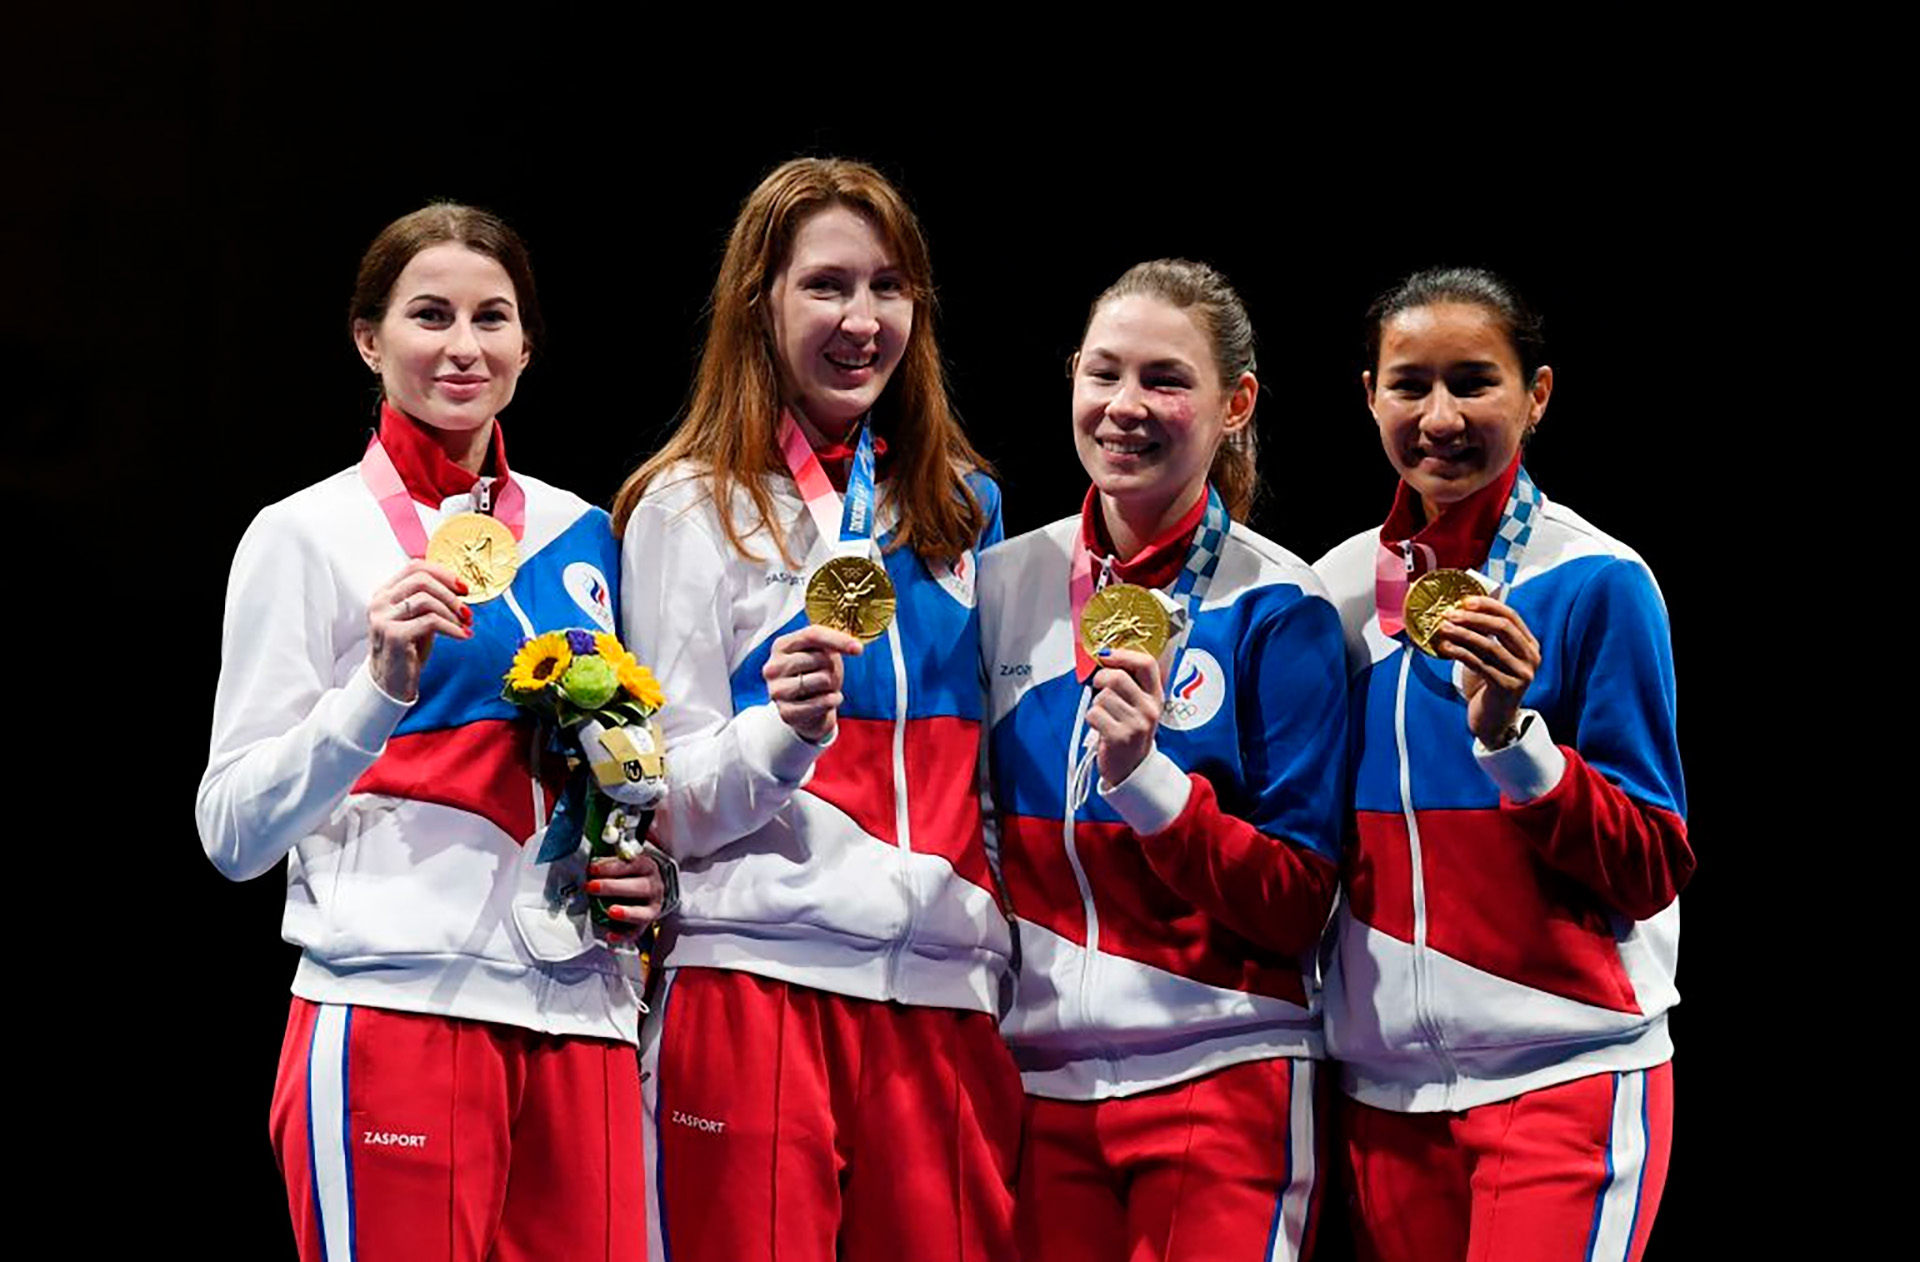 ROC women's foil team wins gold at the Tokyo Olympics 